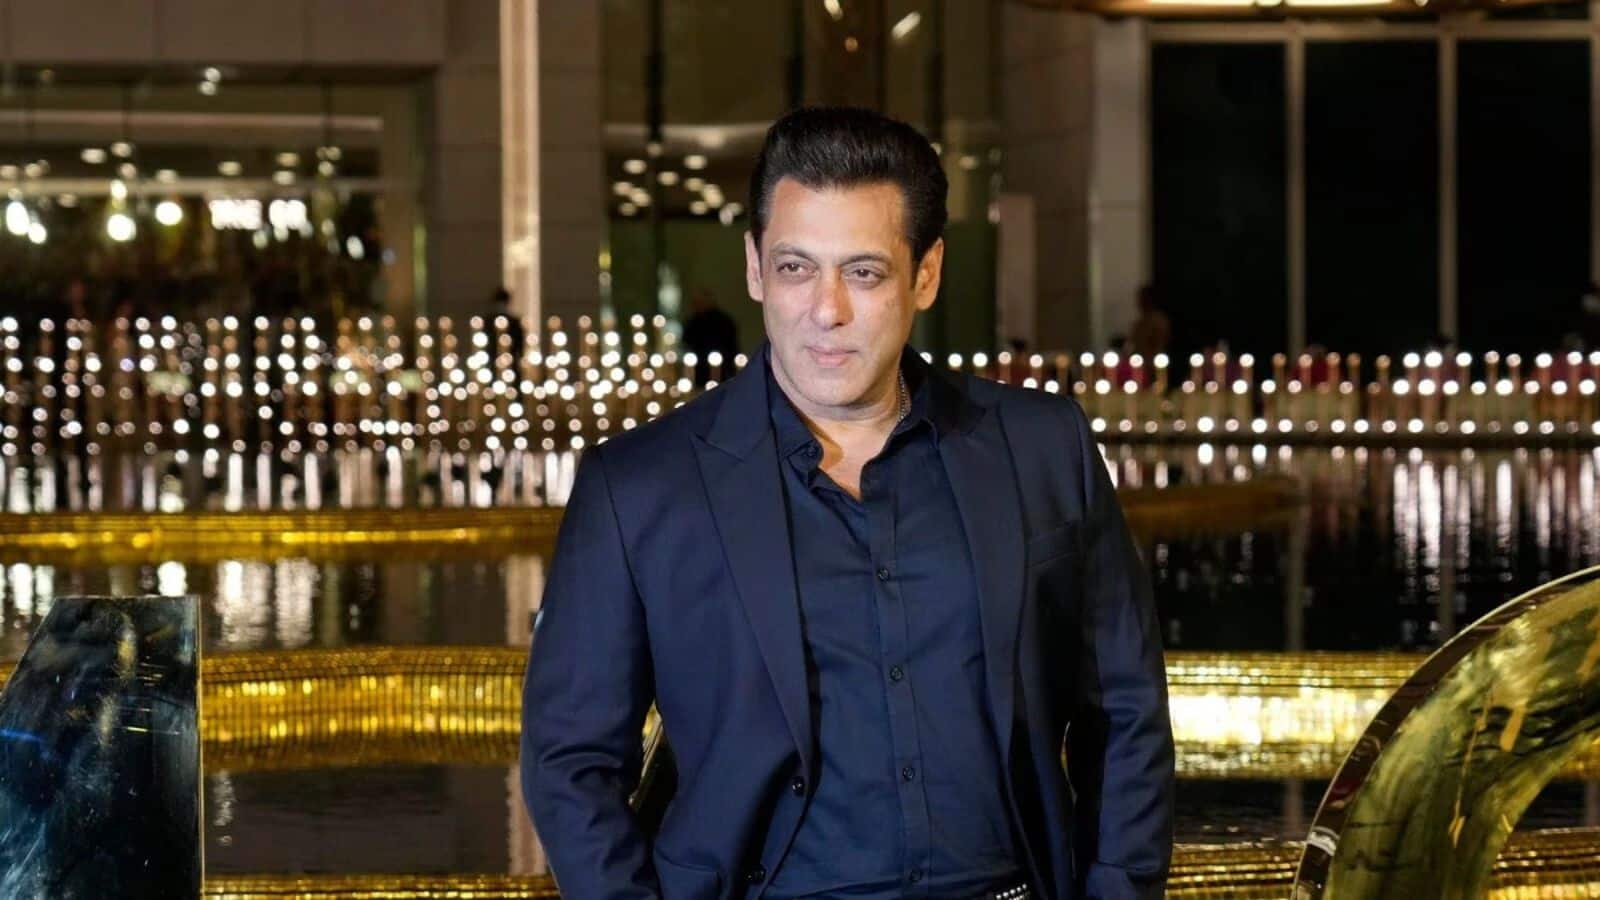 Salman unfazed by firing incident, to continue work as scheduled